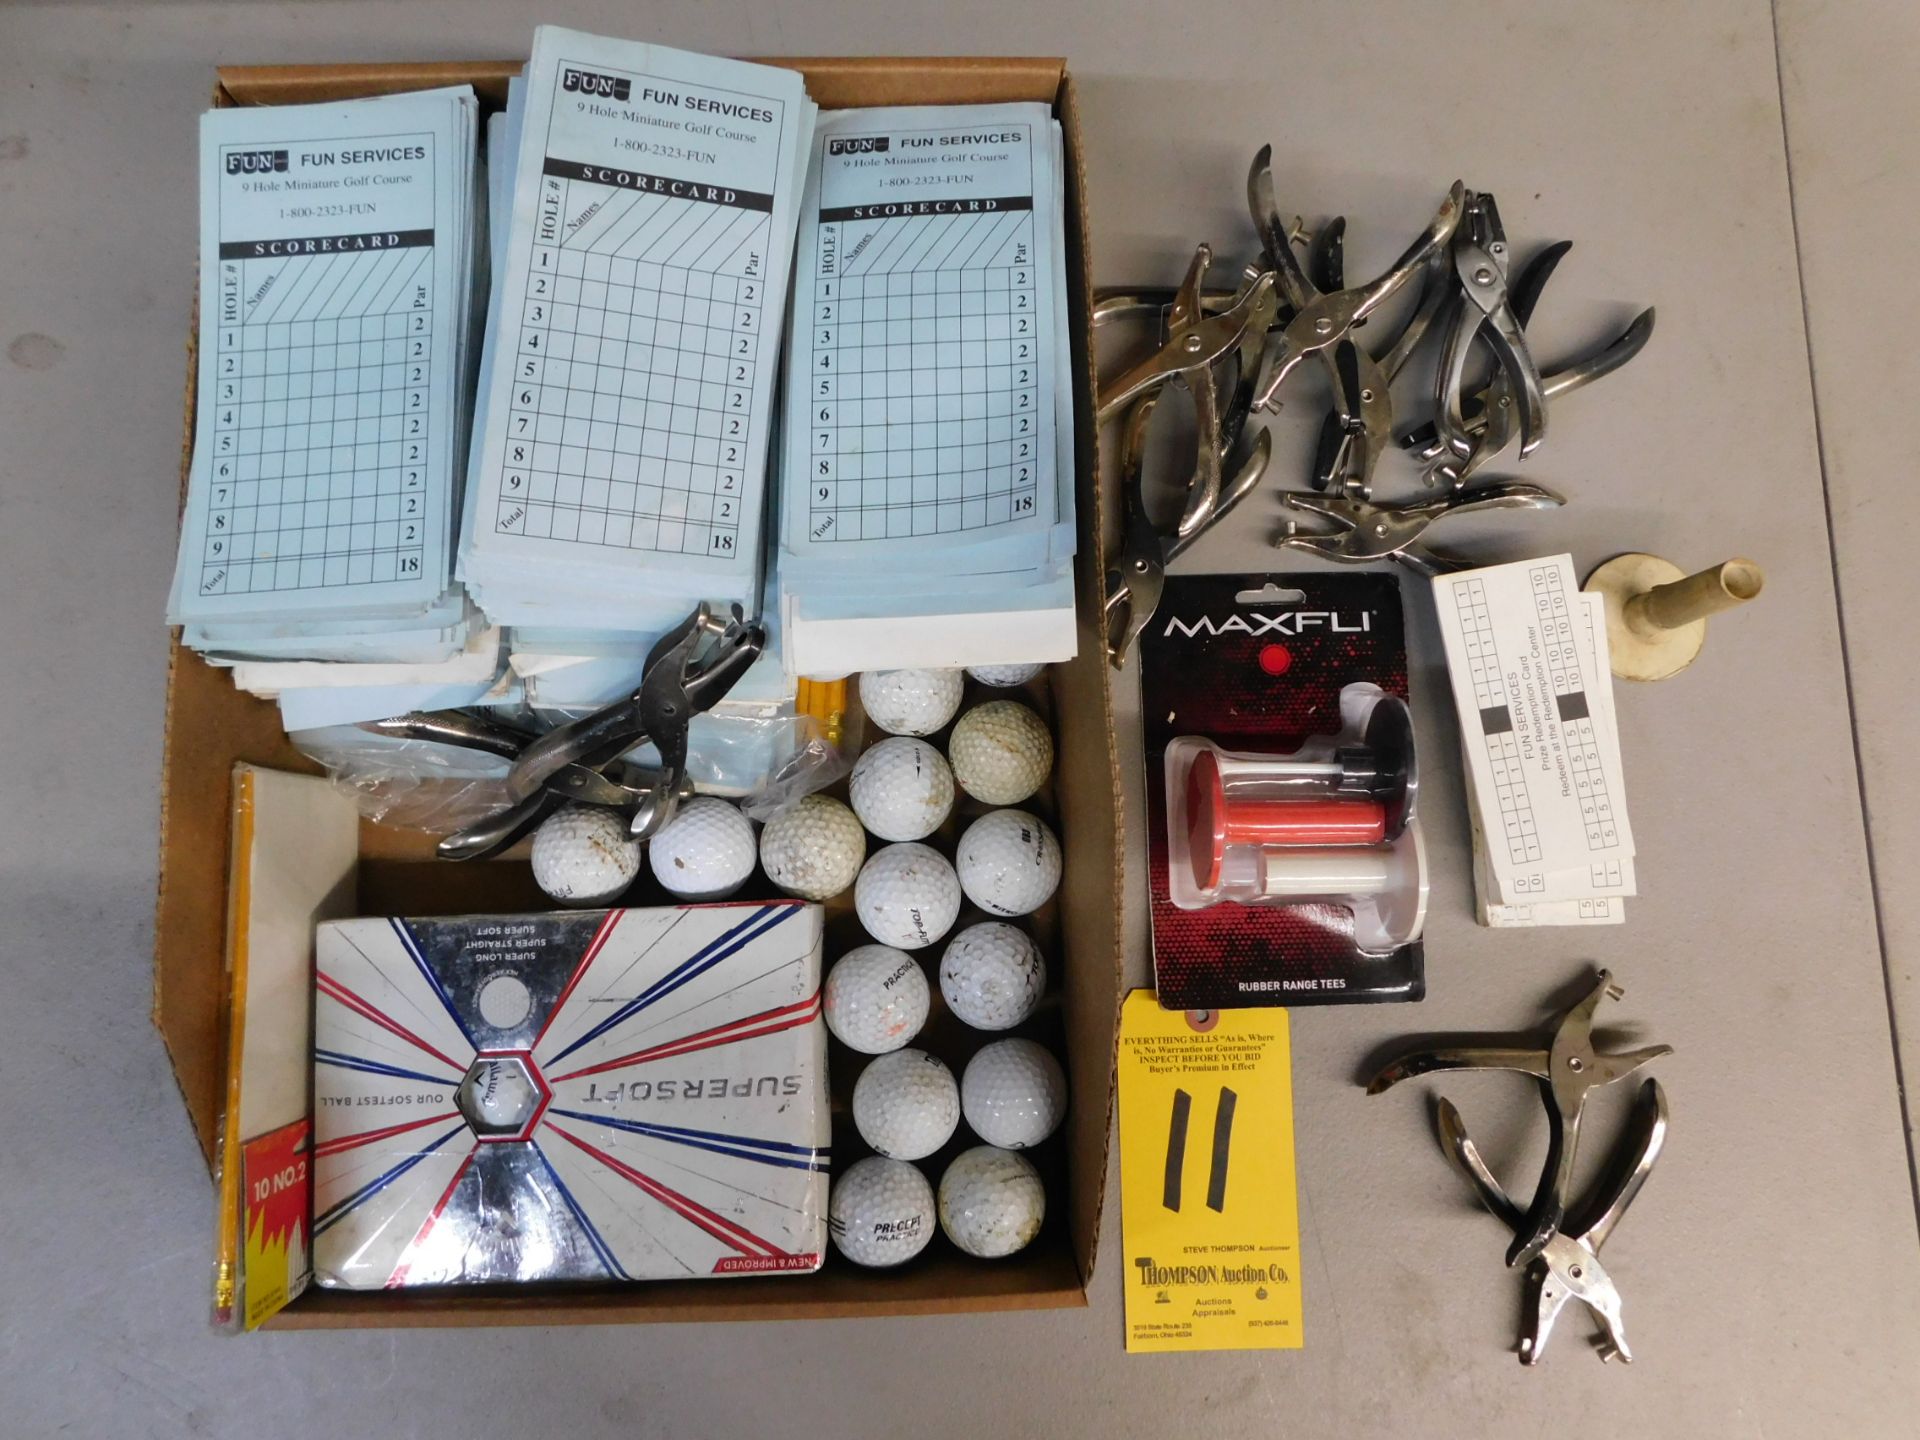 Miniture Golf, Score Cards, Hole Punches & Golf balls